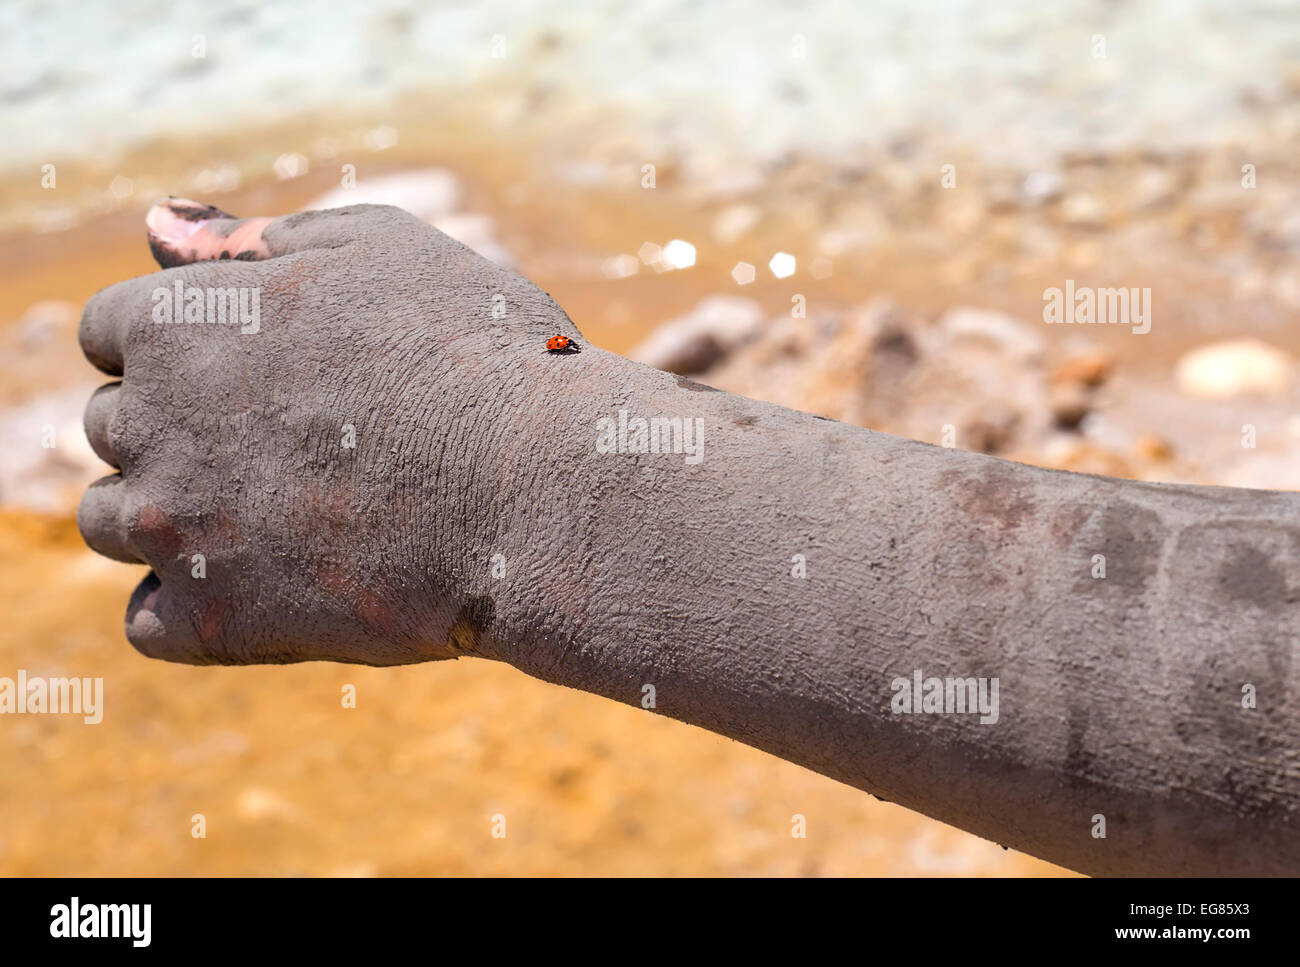 Ladybug lands on a mud covered arm. Photographed at the Dead Sea, Israel Stock Photo